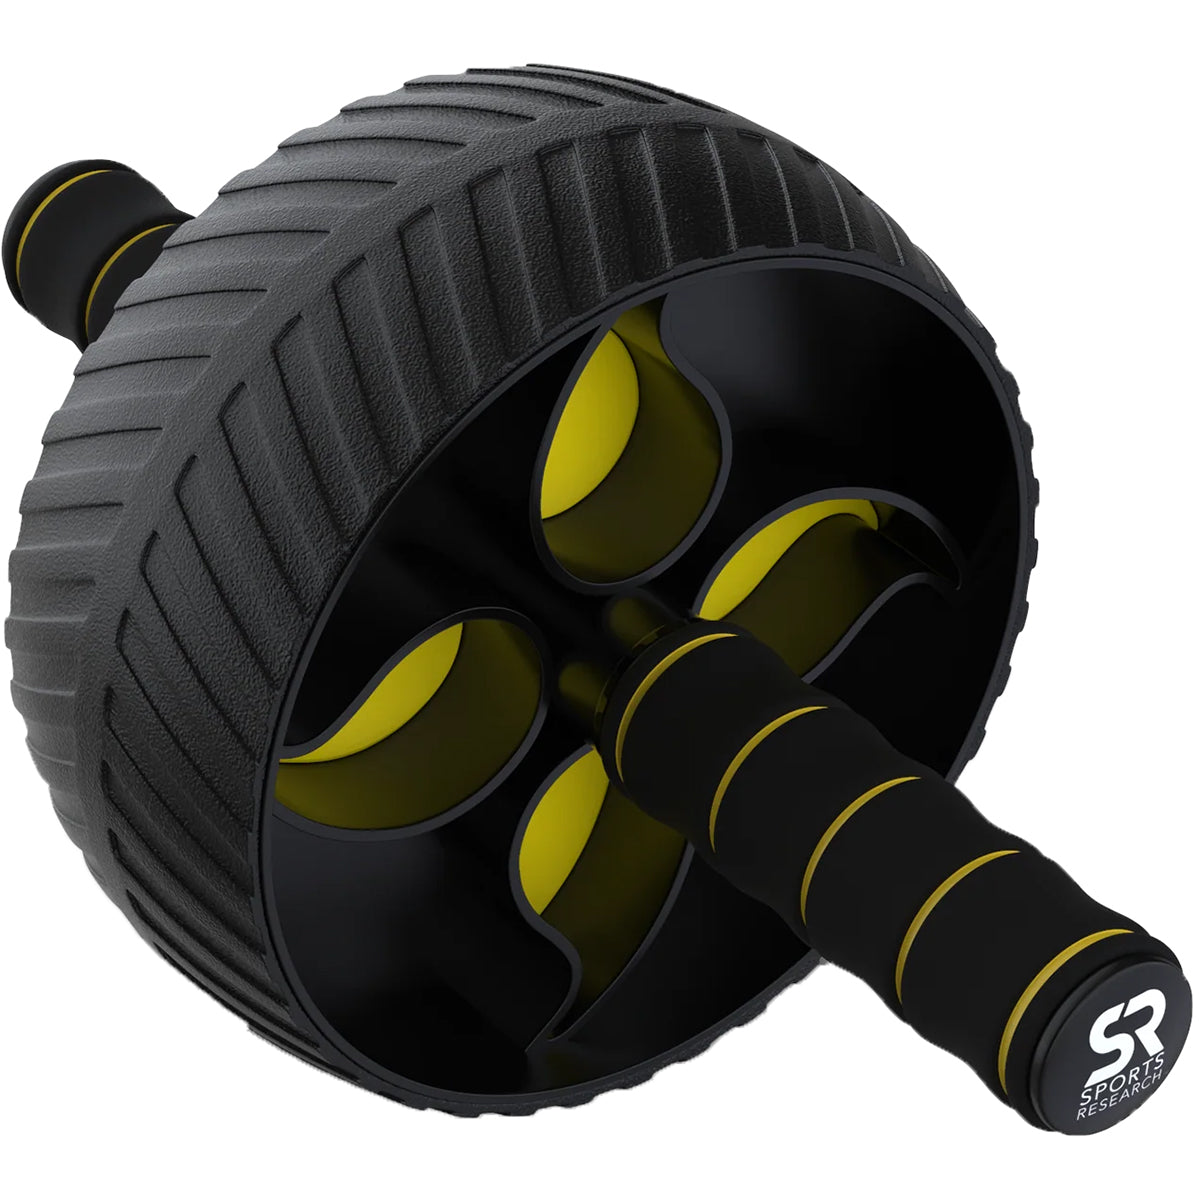 Sports Research Sweet Sweat Ab Wheel with Knee Pad Sports Research